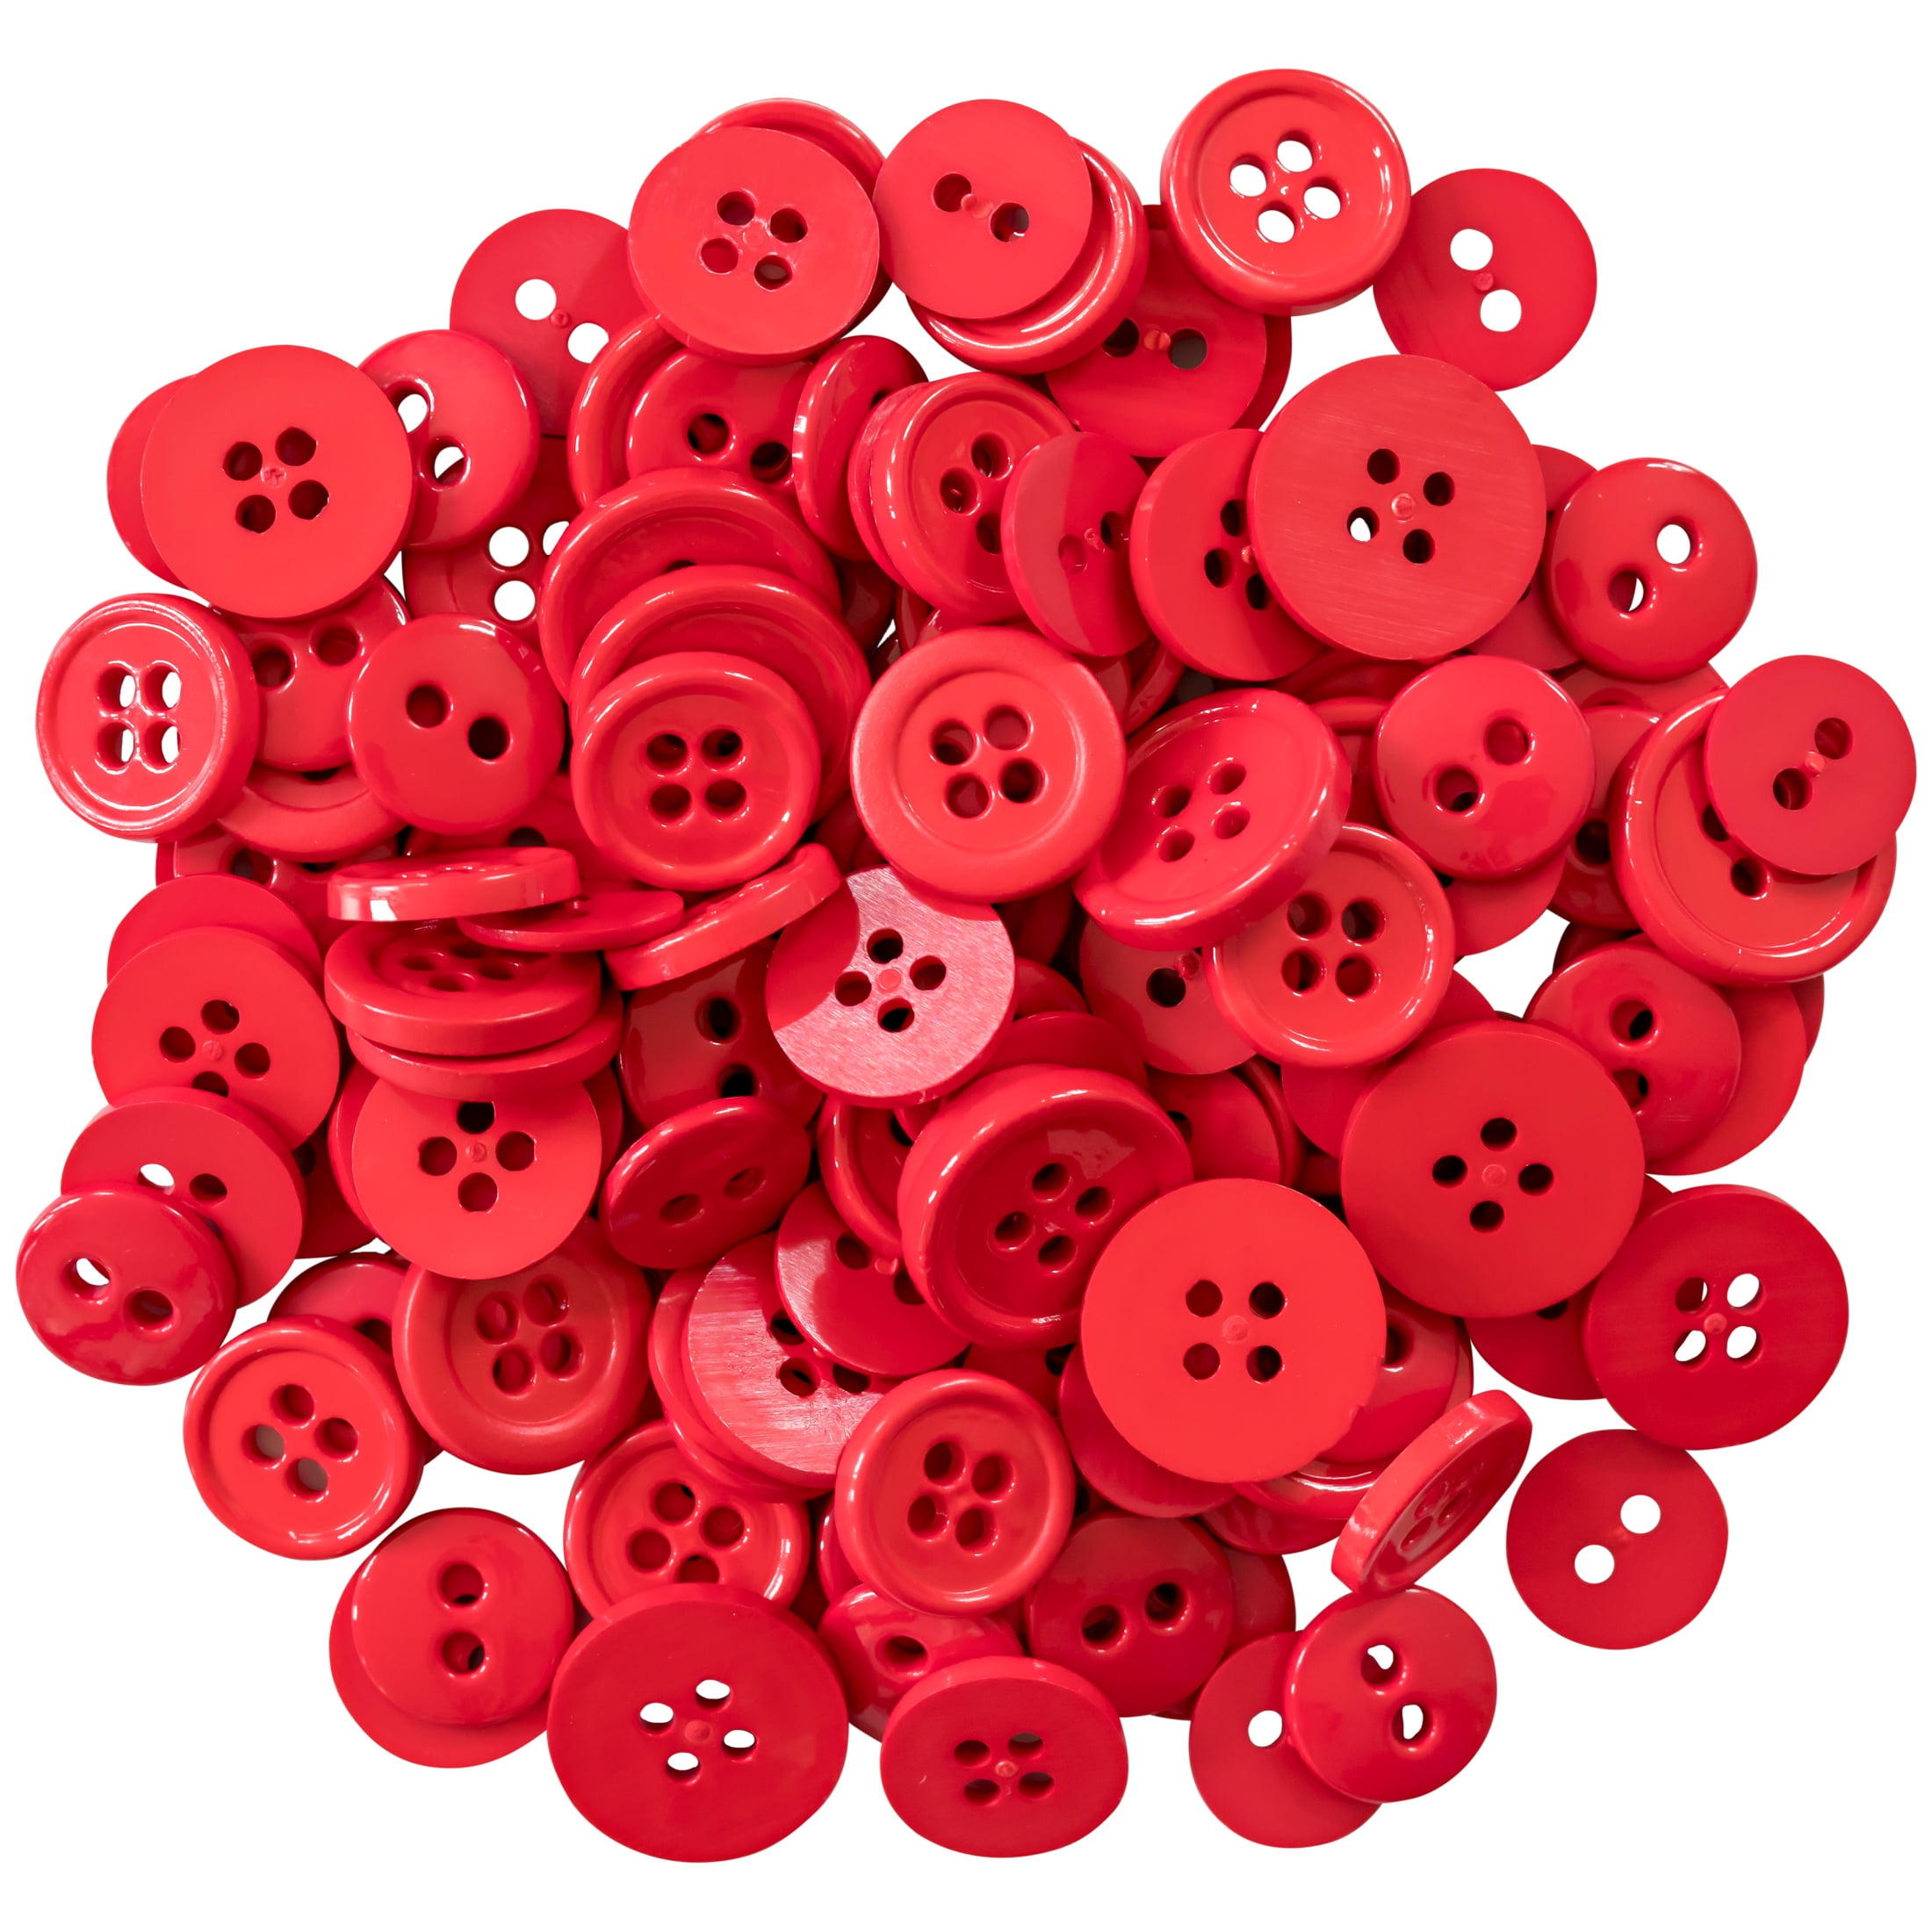  Red Heart Buttons For Sewing, Handmade Large Decorative Pieces  : Handmade Products